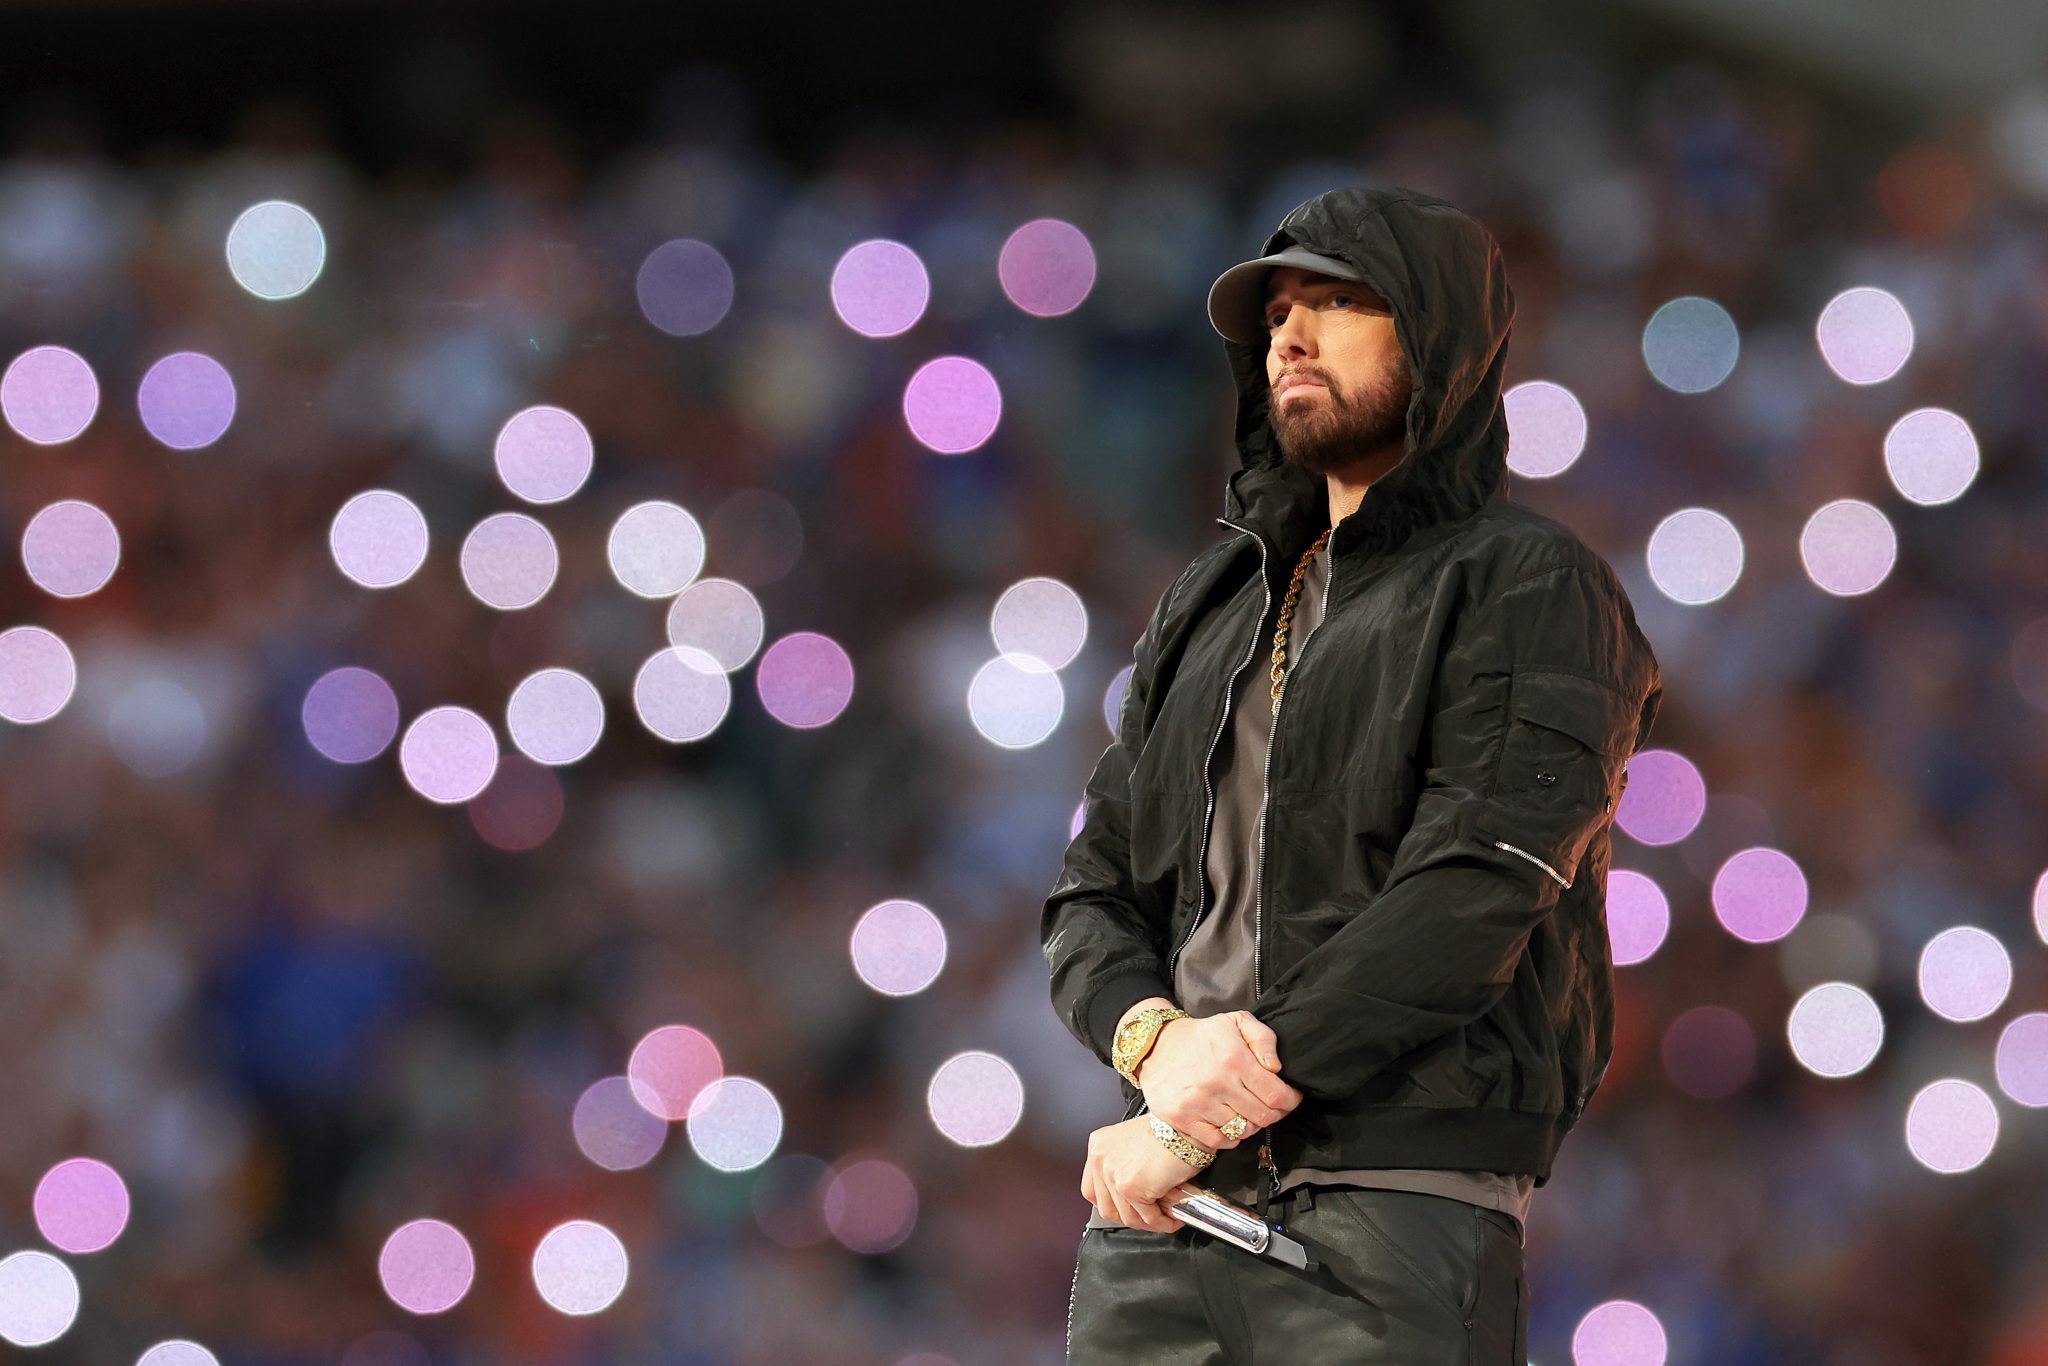 INGLEWOOD, CALIFORNIA - FEBRUARY 13: Eminem performs during the Pepsi Super Bowl LVI Halftime Show at SoFi Stadium on February 13, 2022 in Inglewood, California. (Photo by Kevin C. Cox/Getty Images)